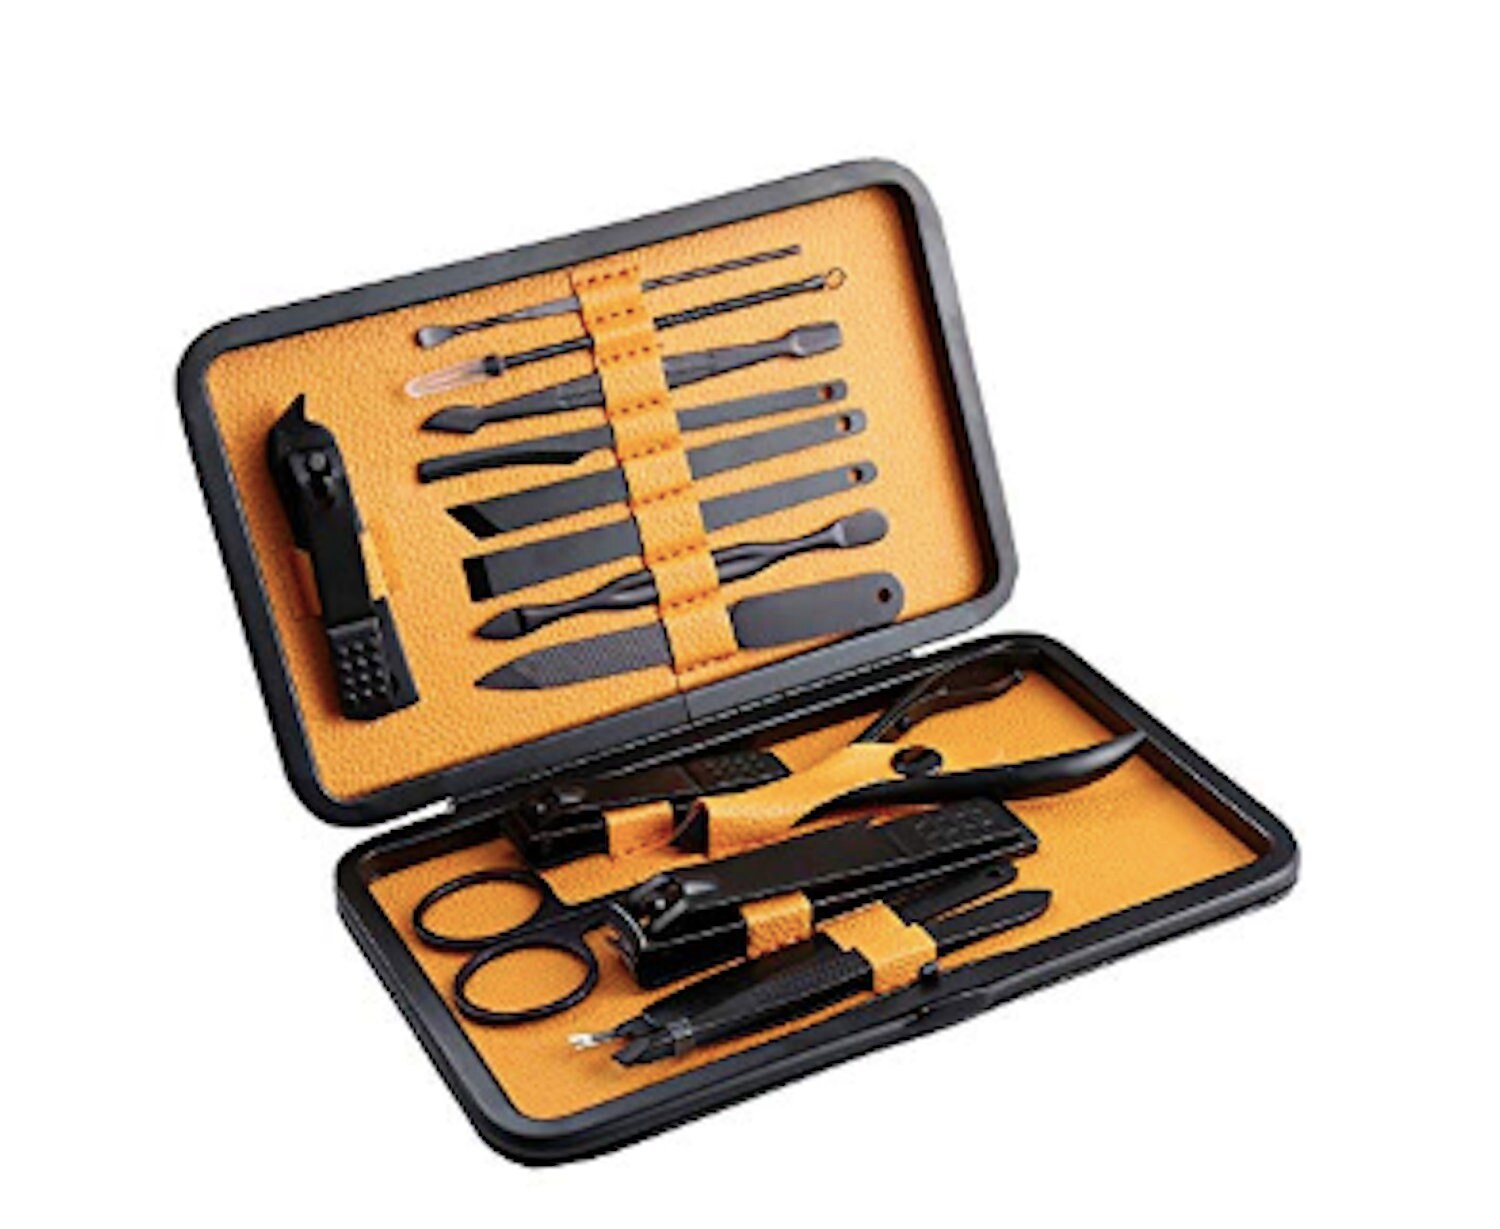 Kershaw Men's Stainless Steel Manicure Set 4-Piece with Case